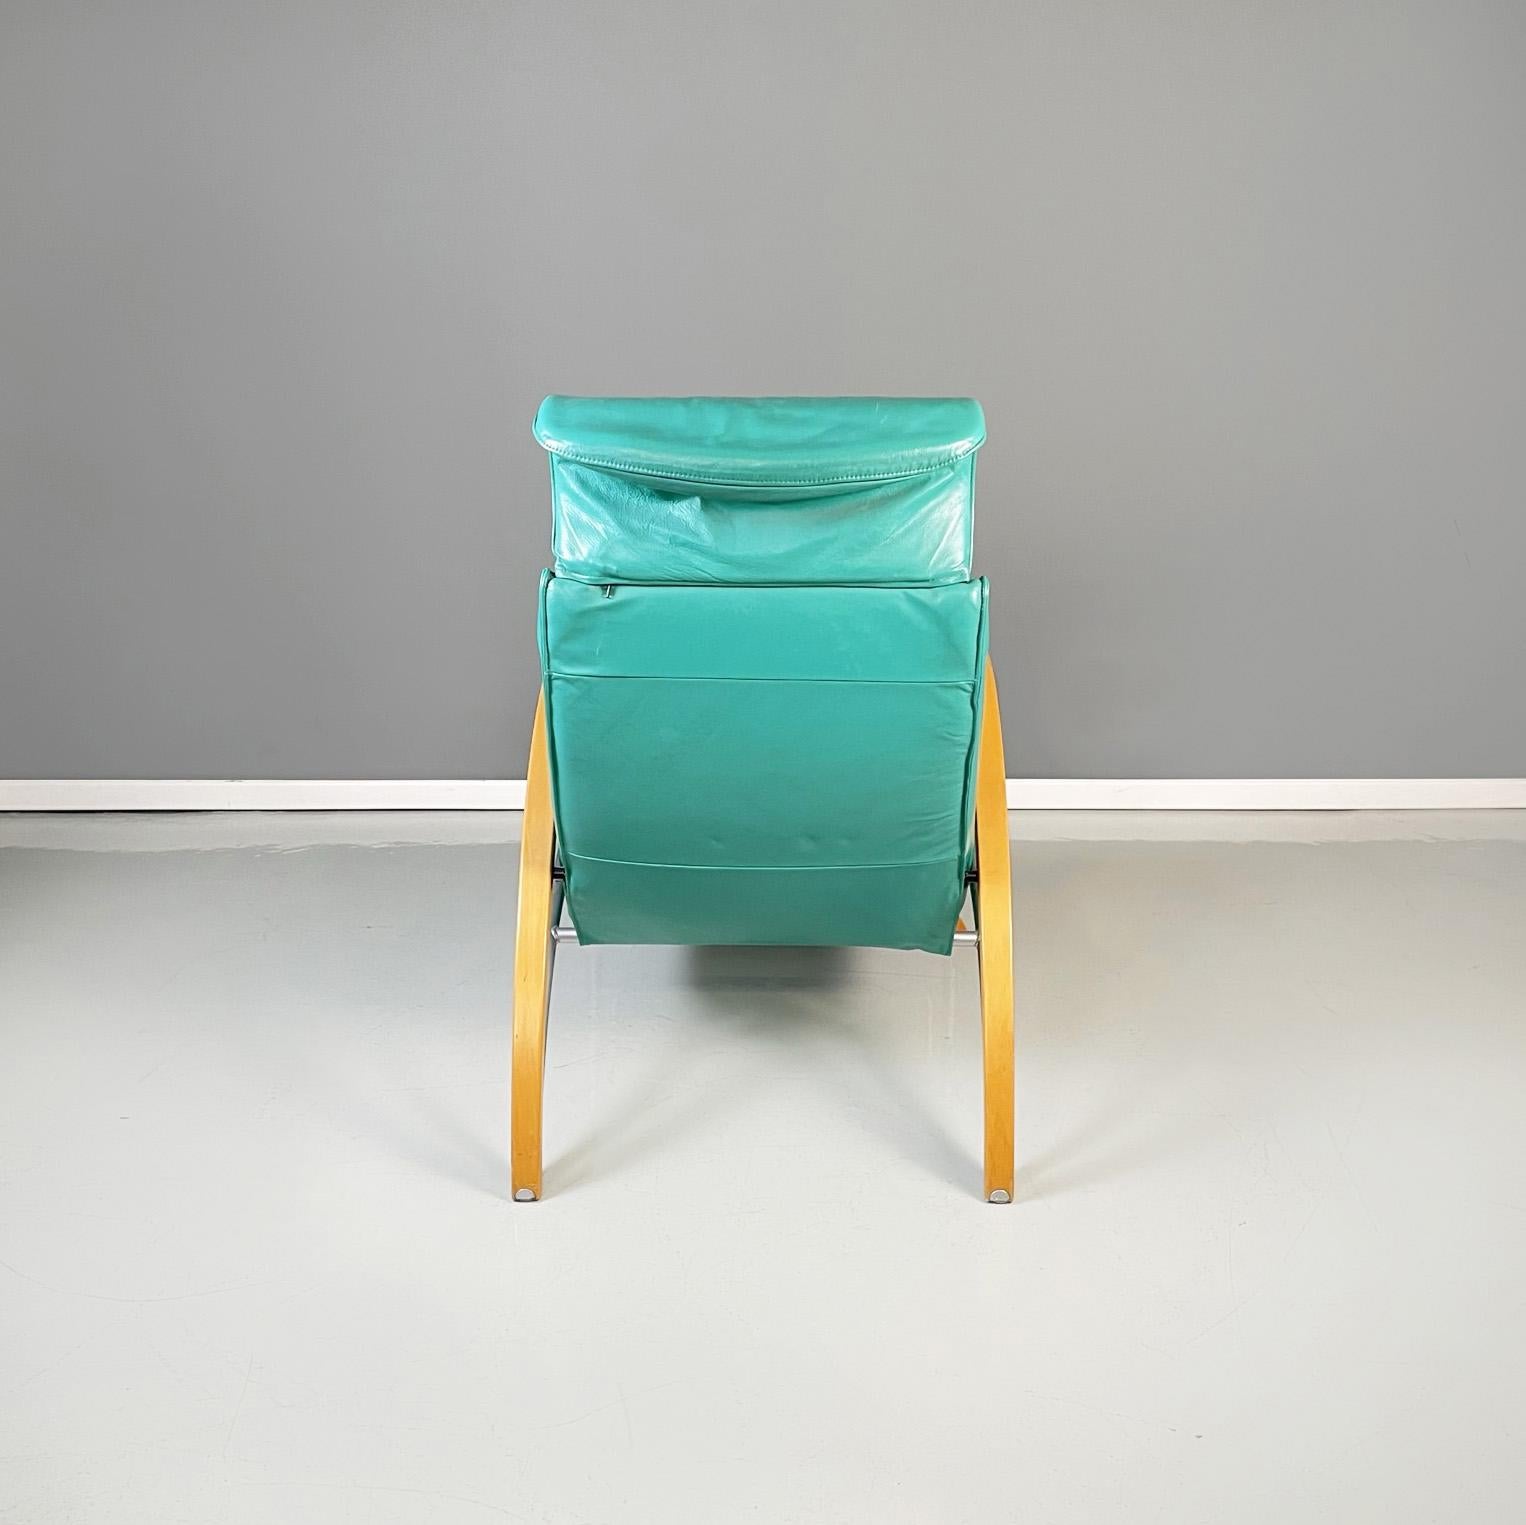 Italian Modern Armchair in Aqua-Green Leather, Wood and Metal, 1980s For Sale 3